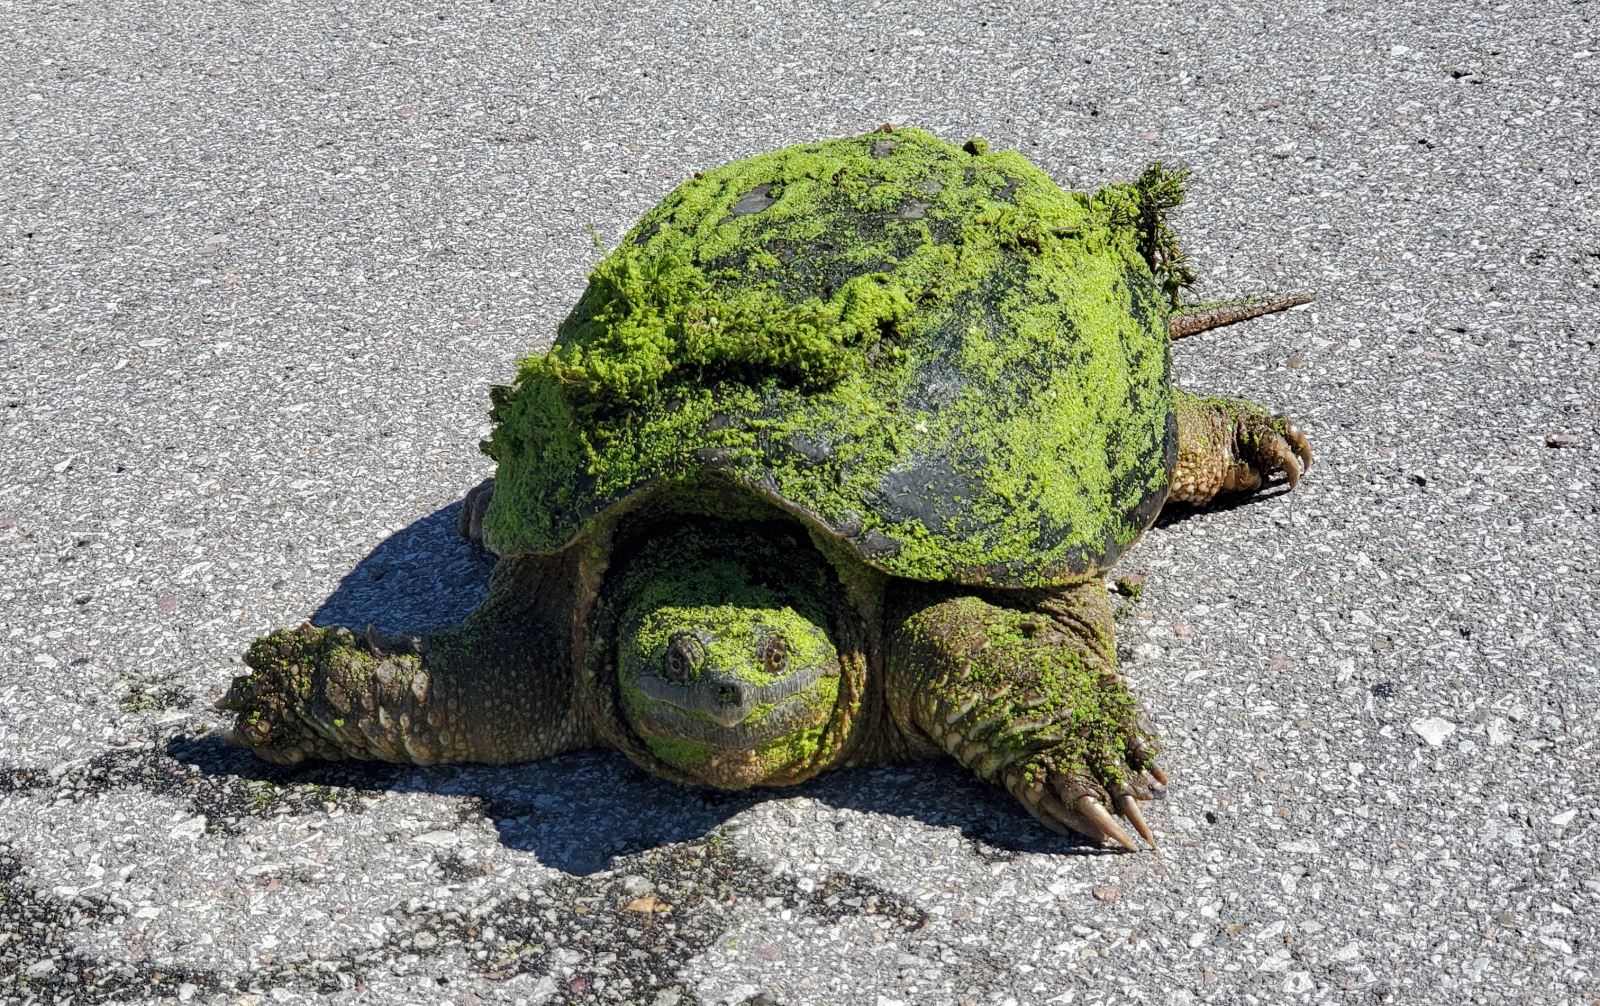 Snapping turtle on highway by Prairie Rose State Park